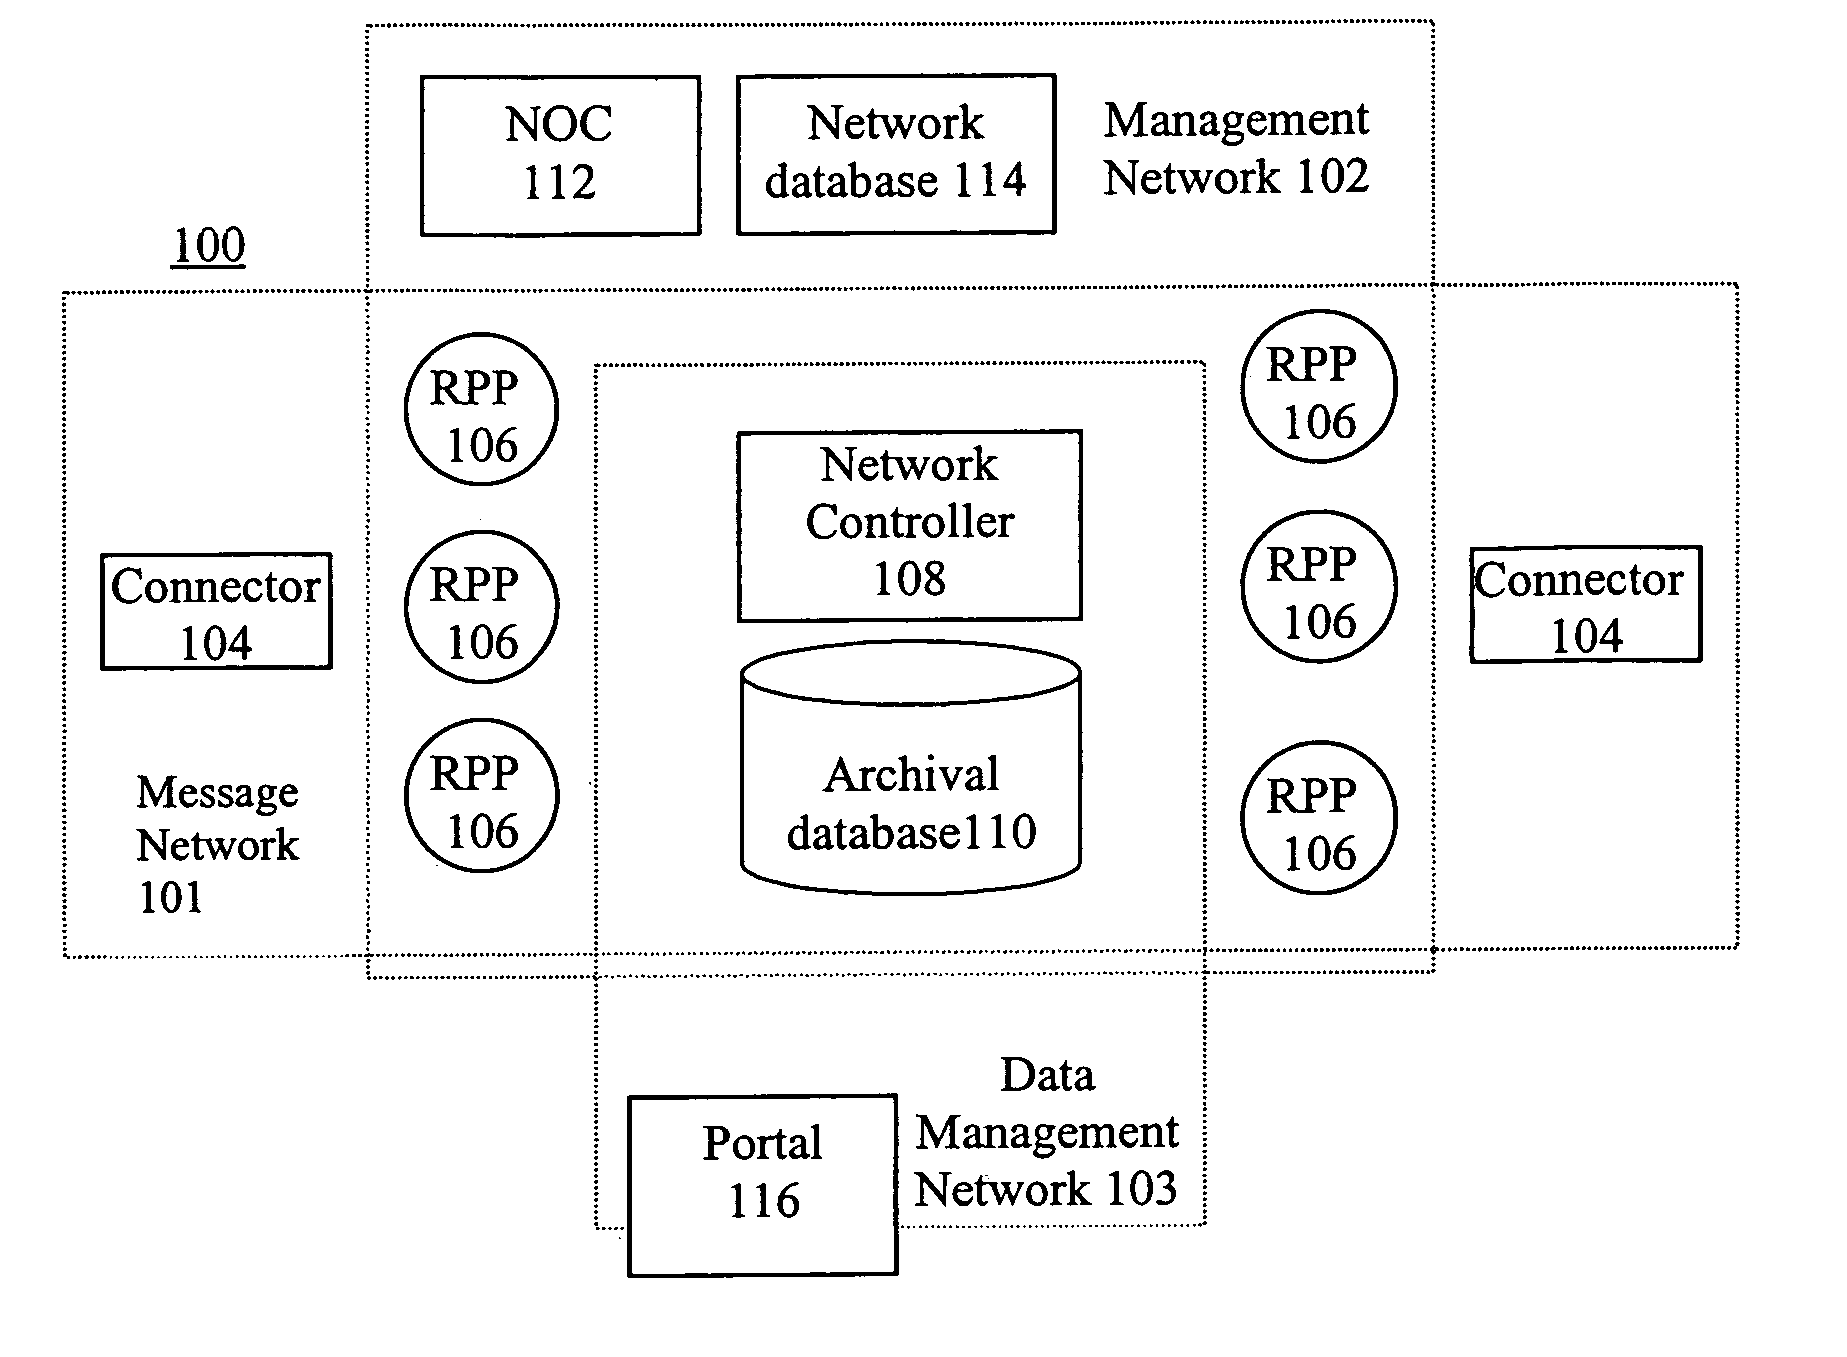 System for handling information and information transfers in a computer network